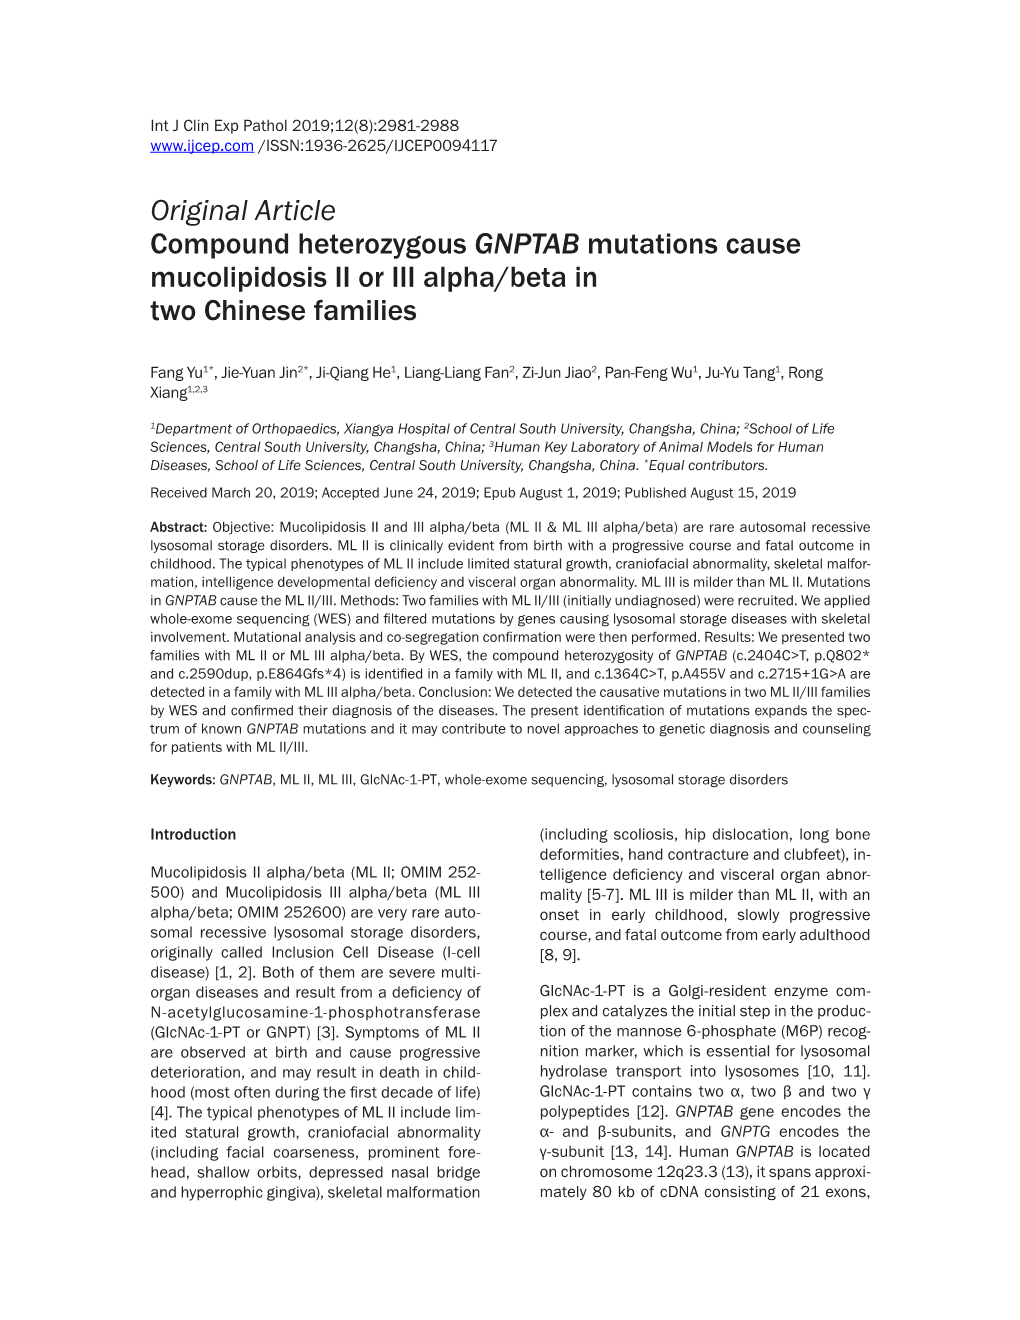 Original Article Compound Heterozygous GNPTAB Mutations Cause Mucolipidosis II Or III Alpha/Beta in Two Chinese Families